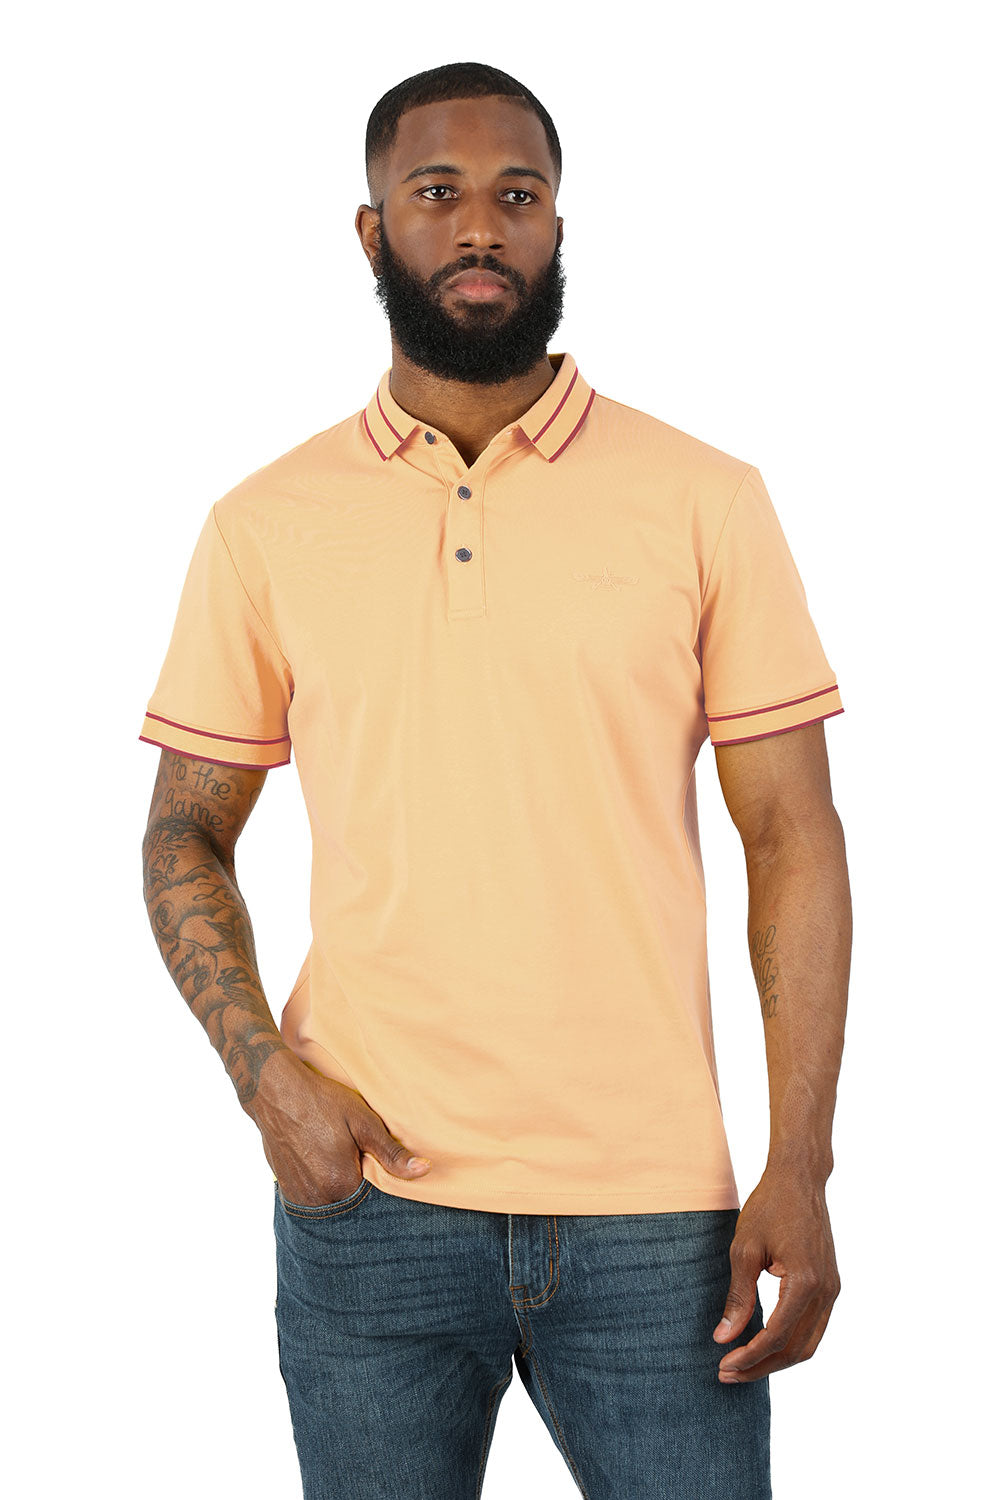 Barabas Men's Solid Color with Logo Polo Shirts 3PP832 Apricot